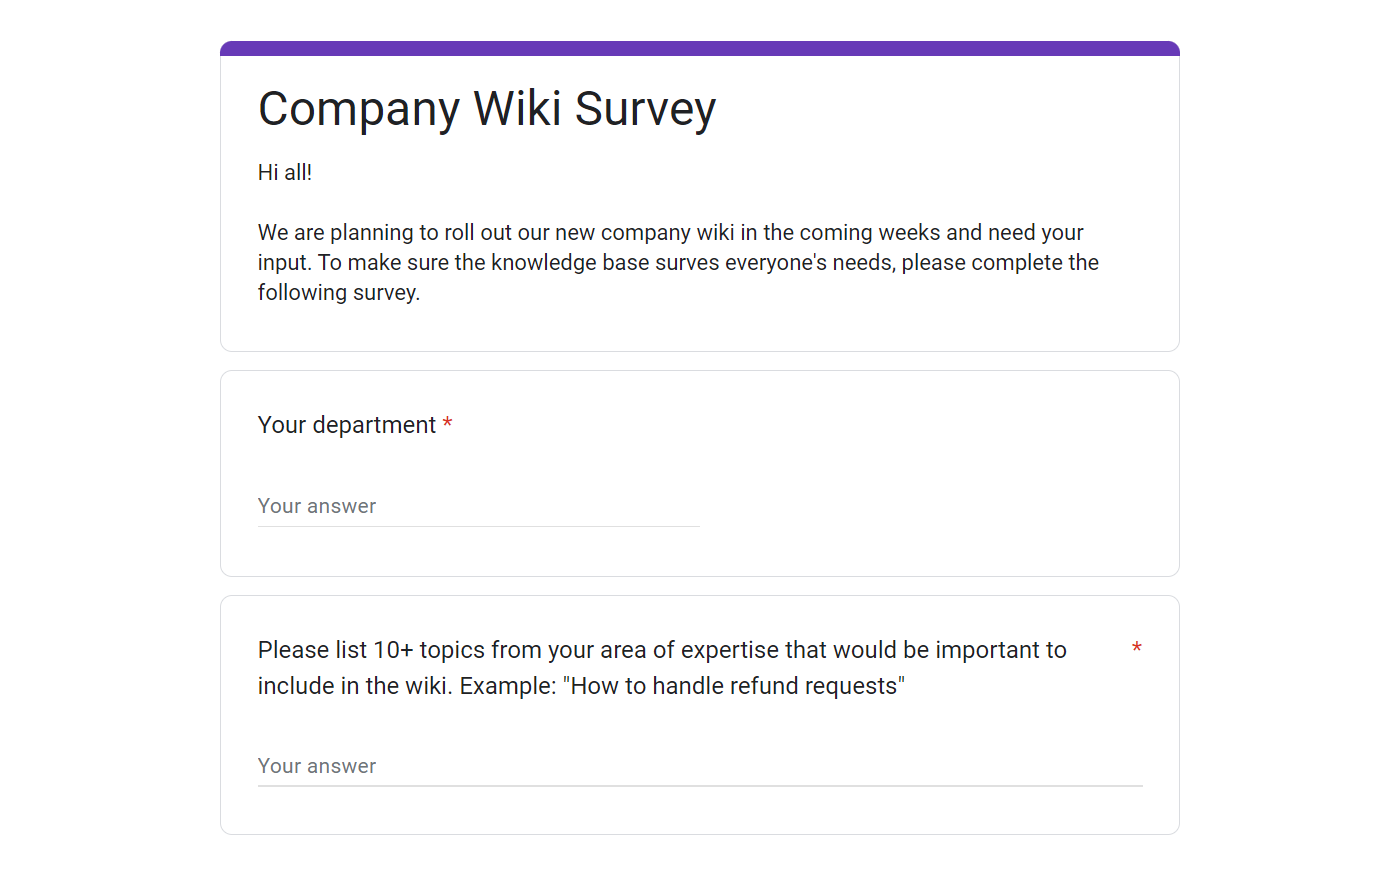 Create your own wiki content survey